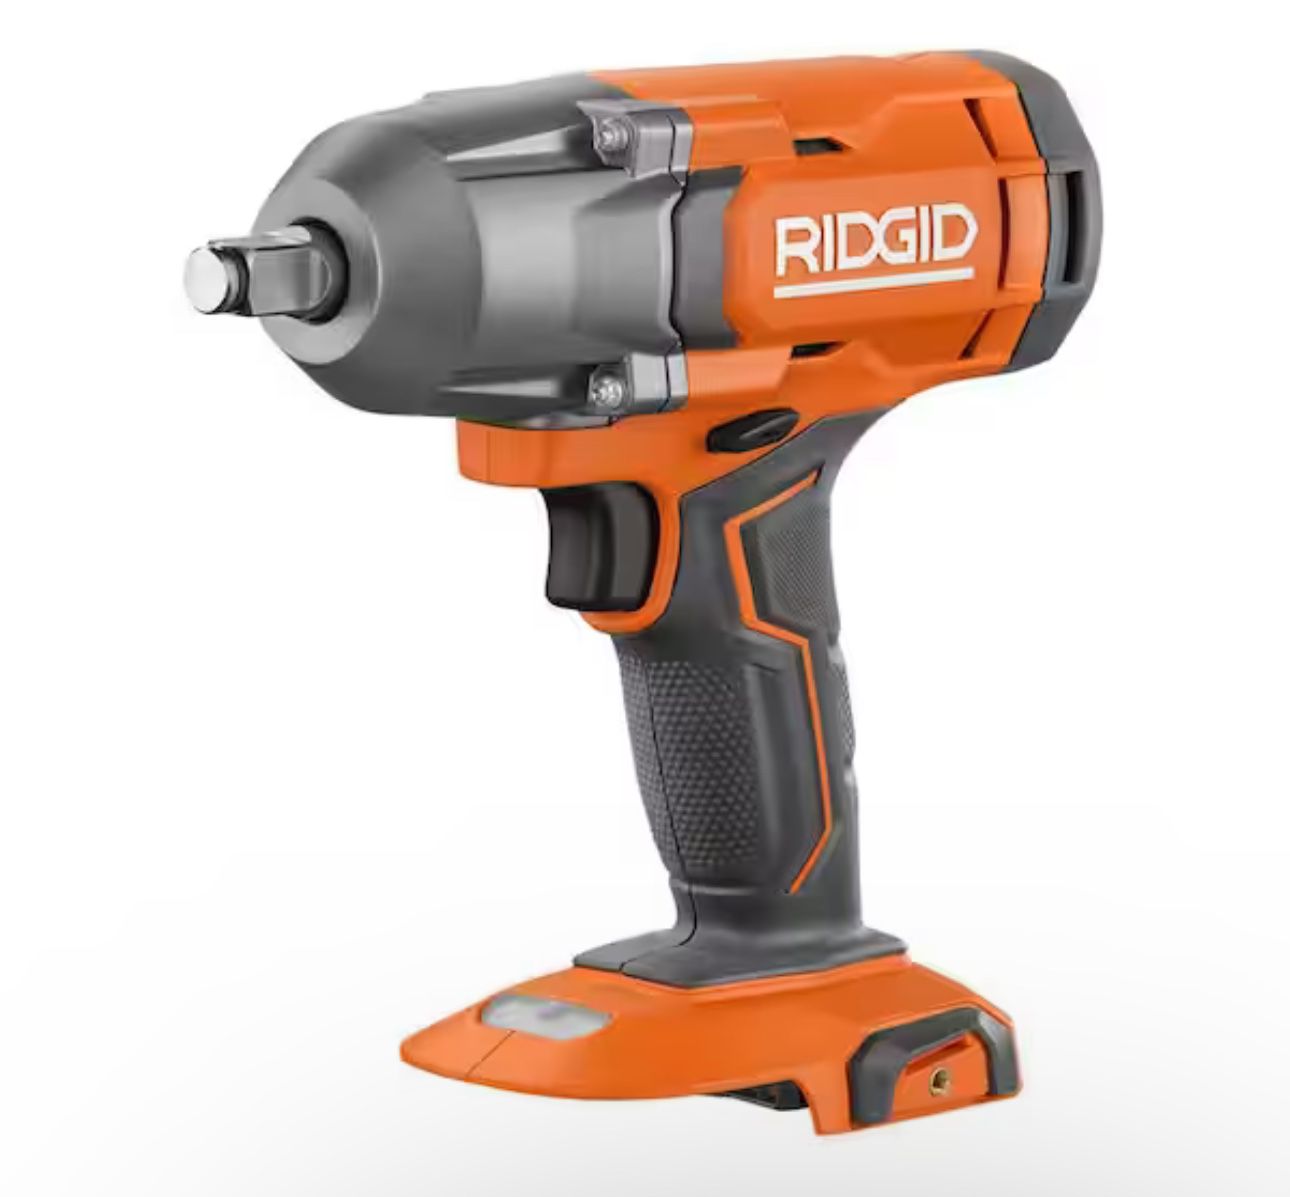 Ridgid 18V 1/2” Impact Wrench (Tool Only)